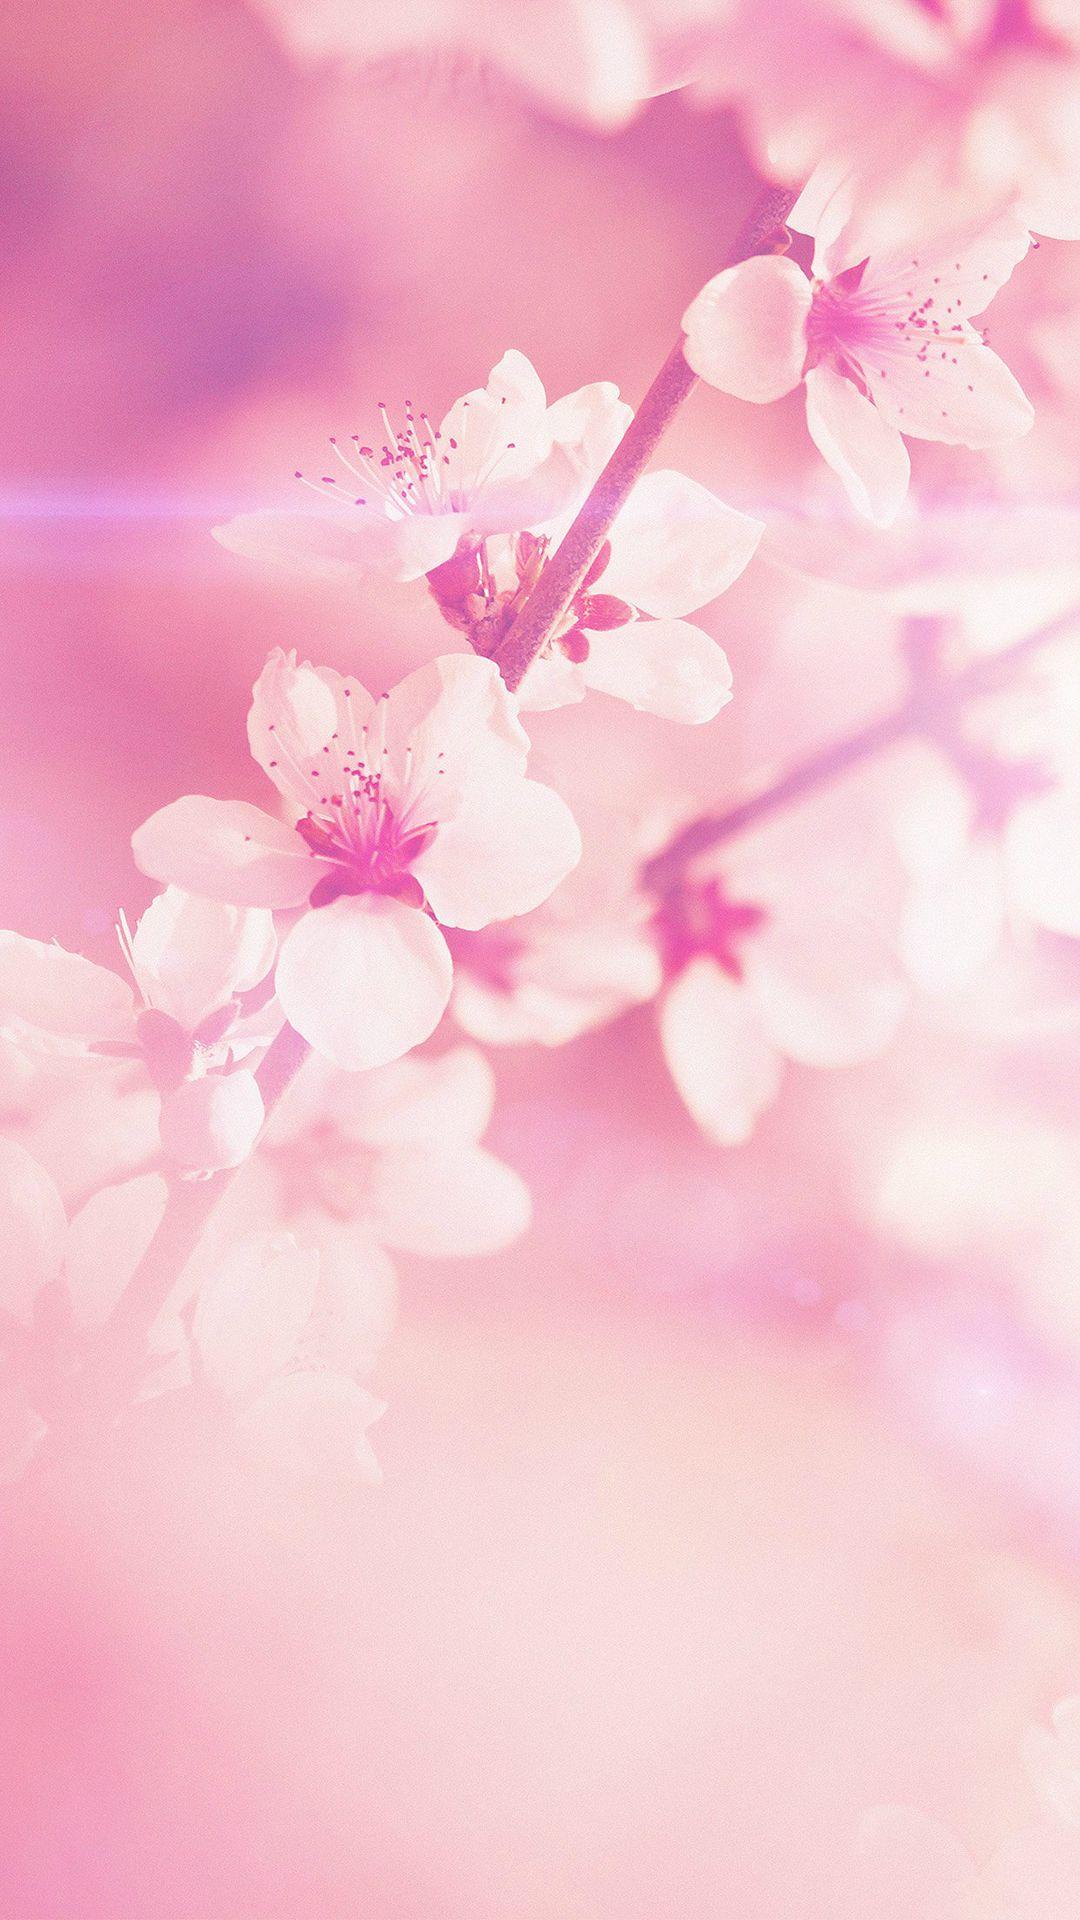 Light Pink Floral iPhone Wallpaper Free Light Pink Floral iPhone Background